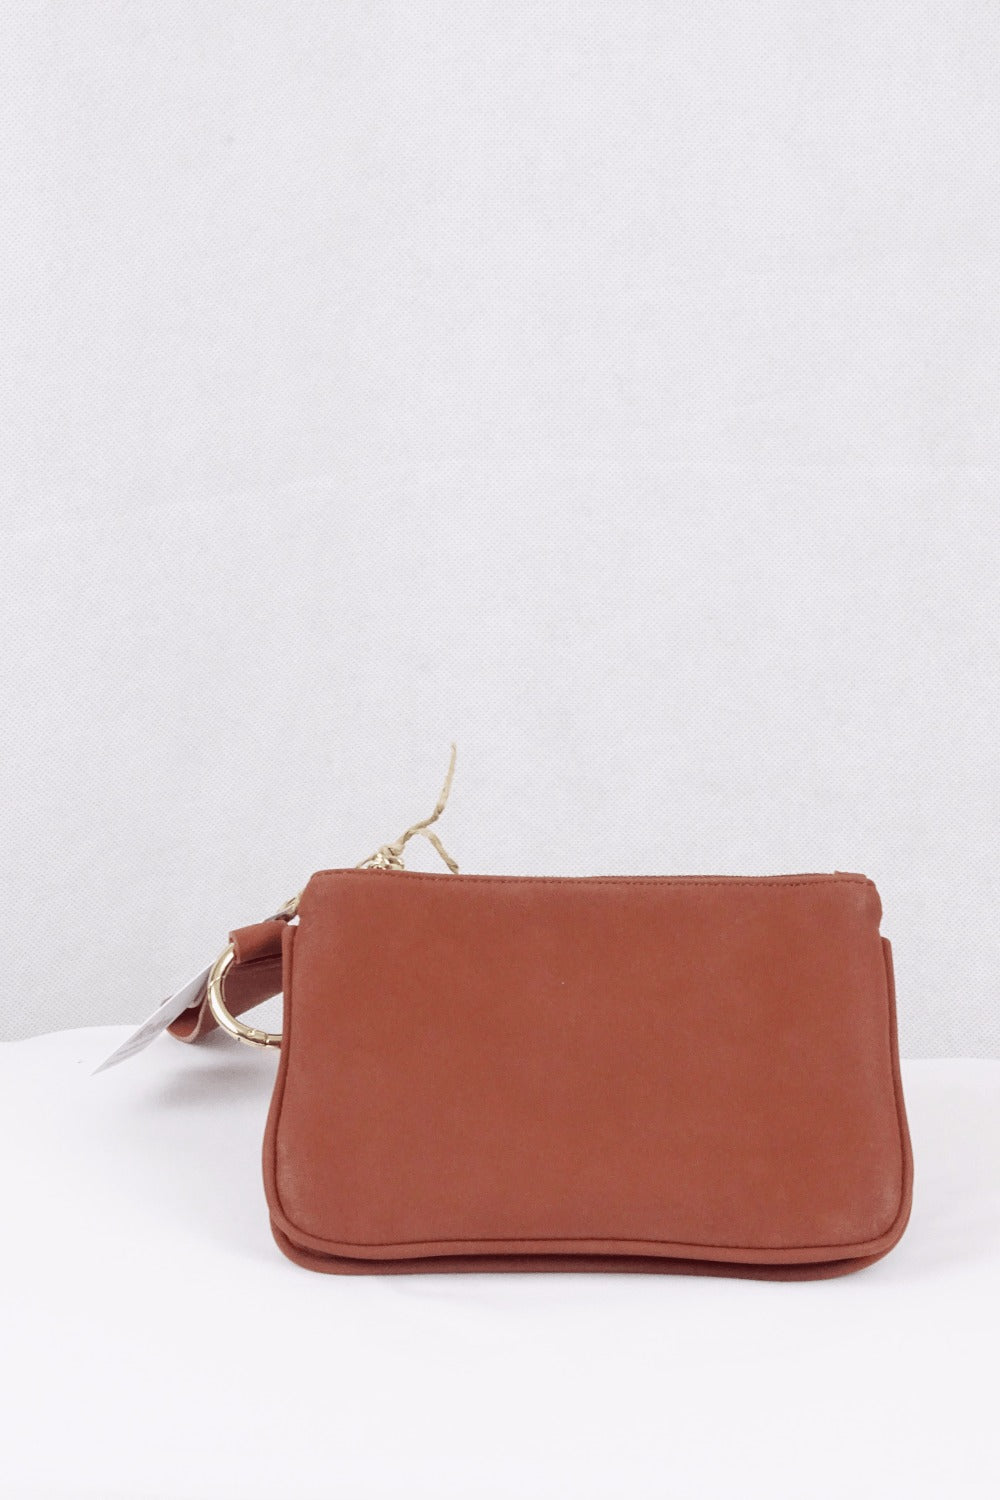 Seed Brown Clutch